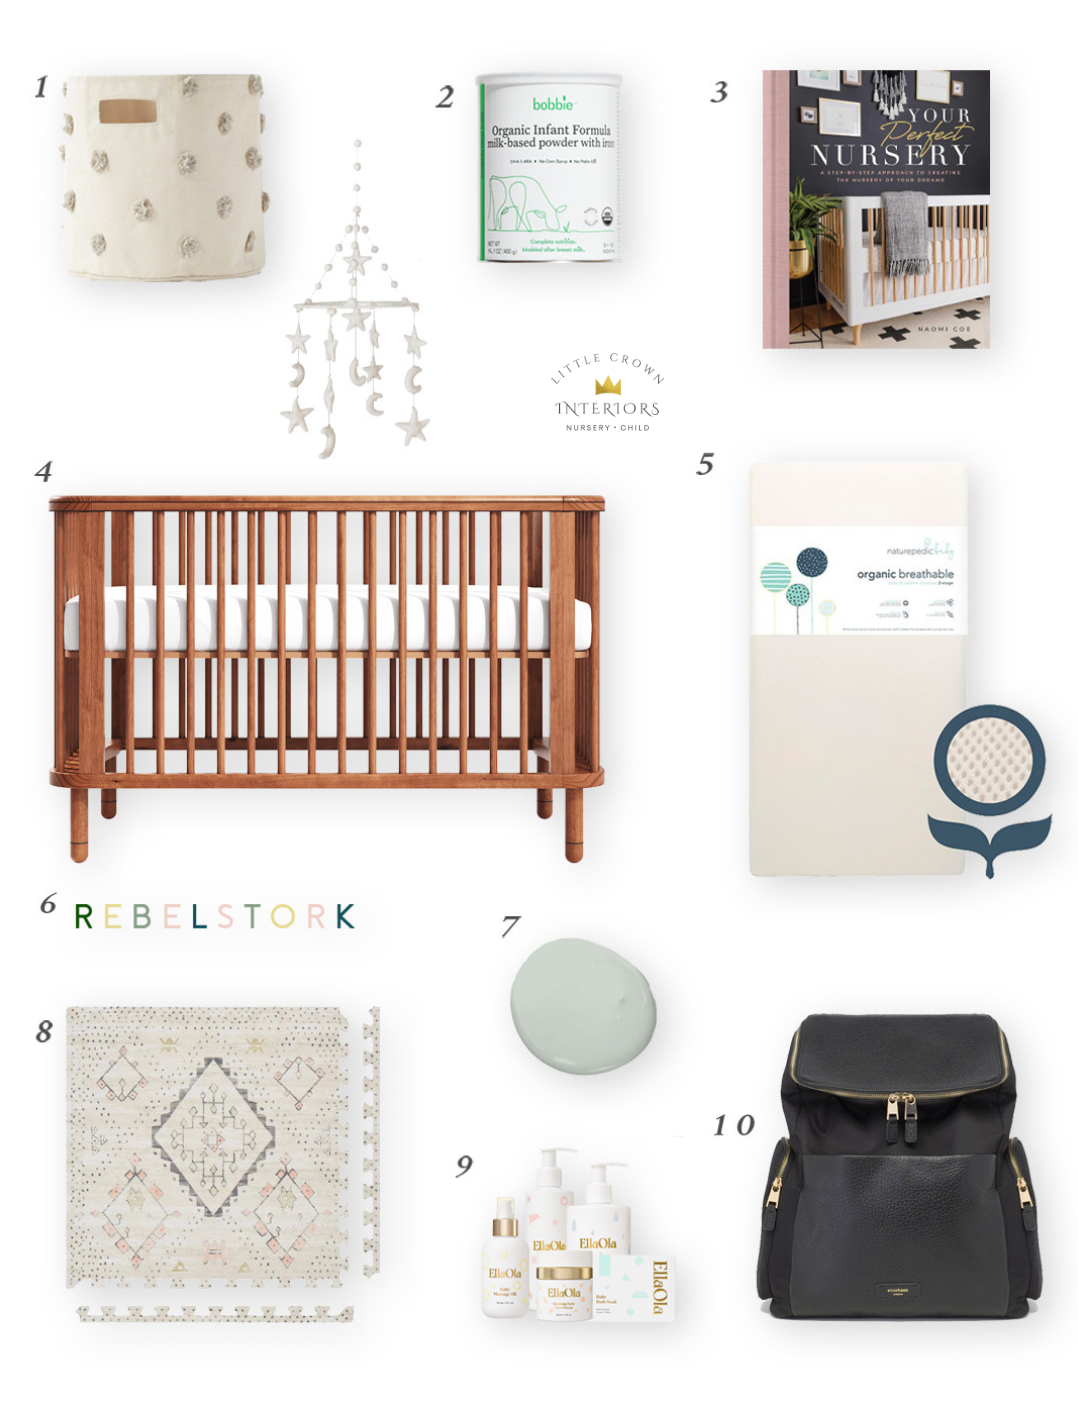 Nursery Giveaway Roundup: Crib, Design Consult, Storksak and more